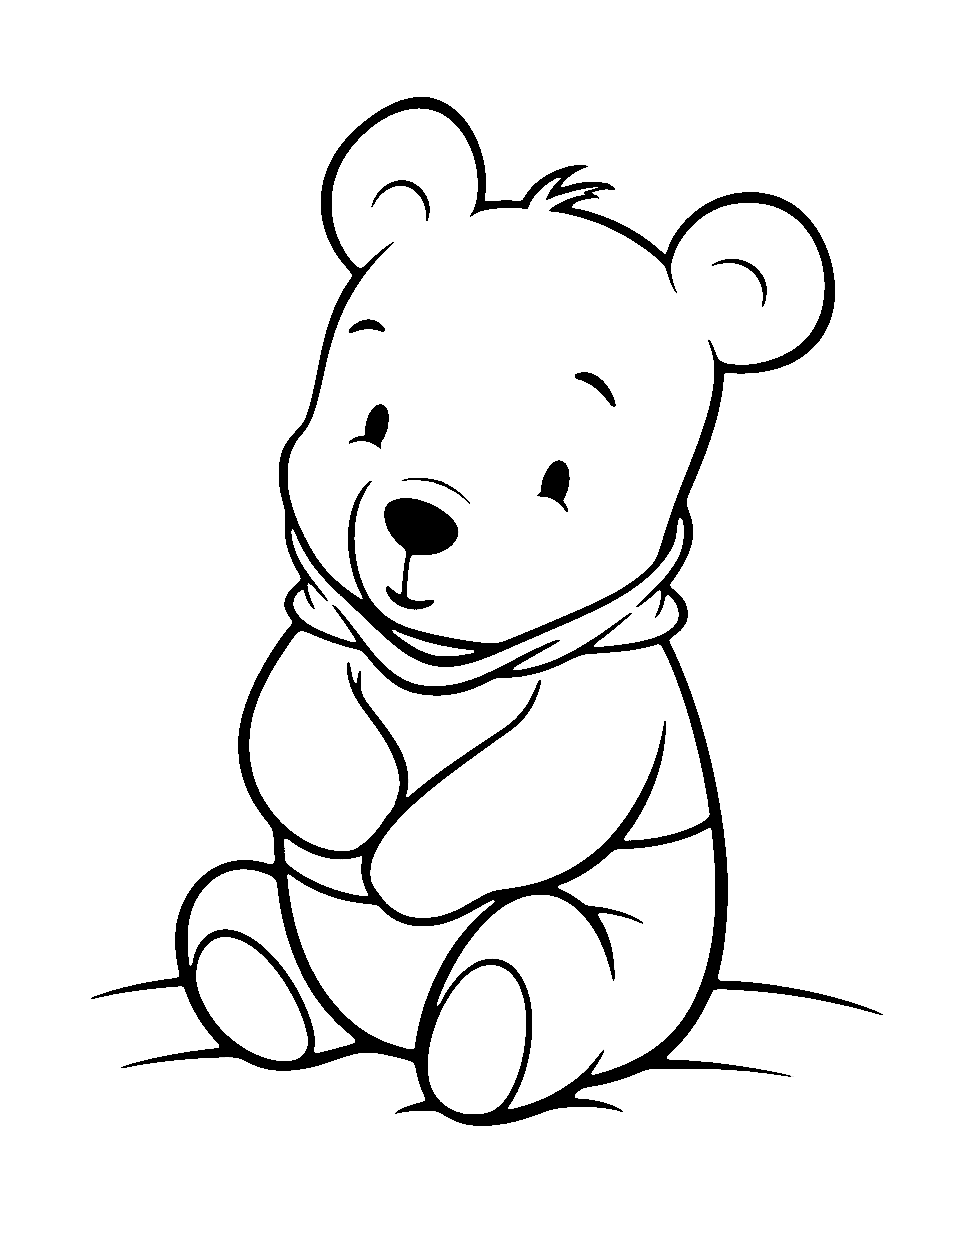 Simple Pooh Coloring Page - A simple, cute, and kawaii depiction of Pooh Bear sitting and thinking.